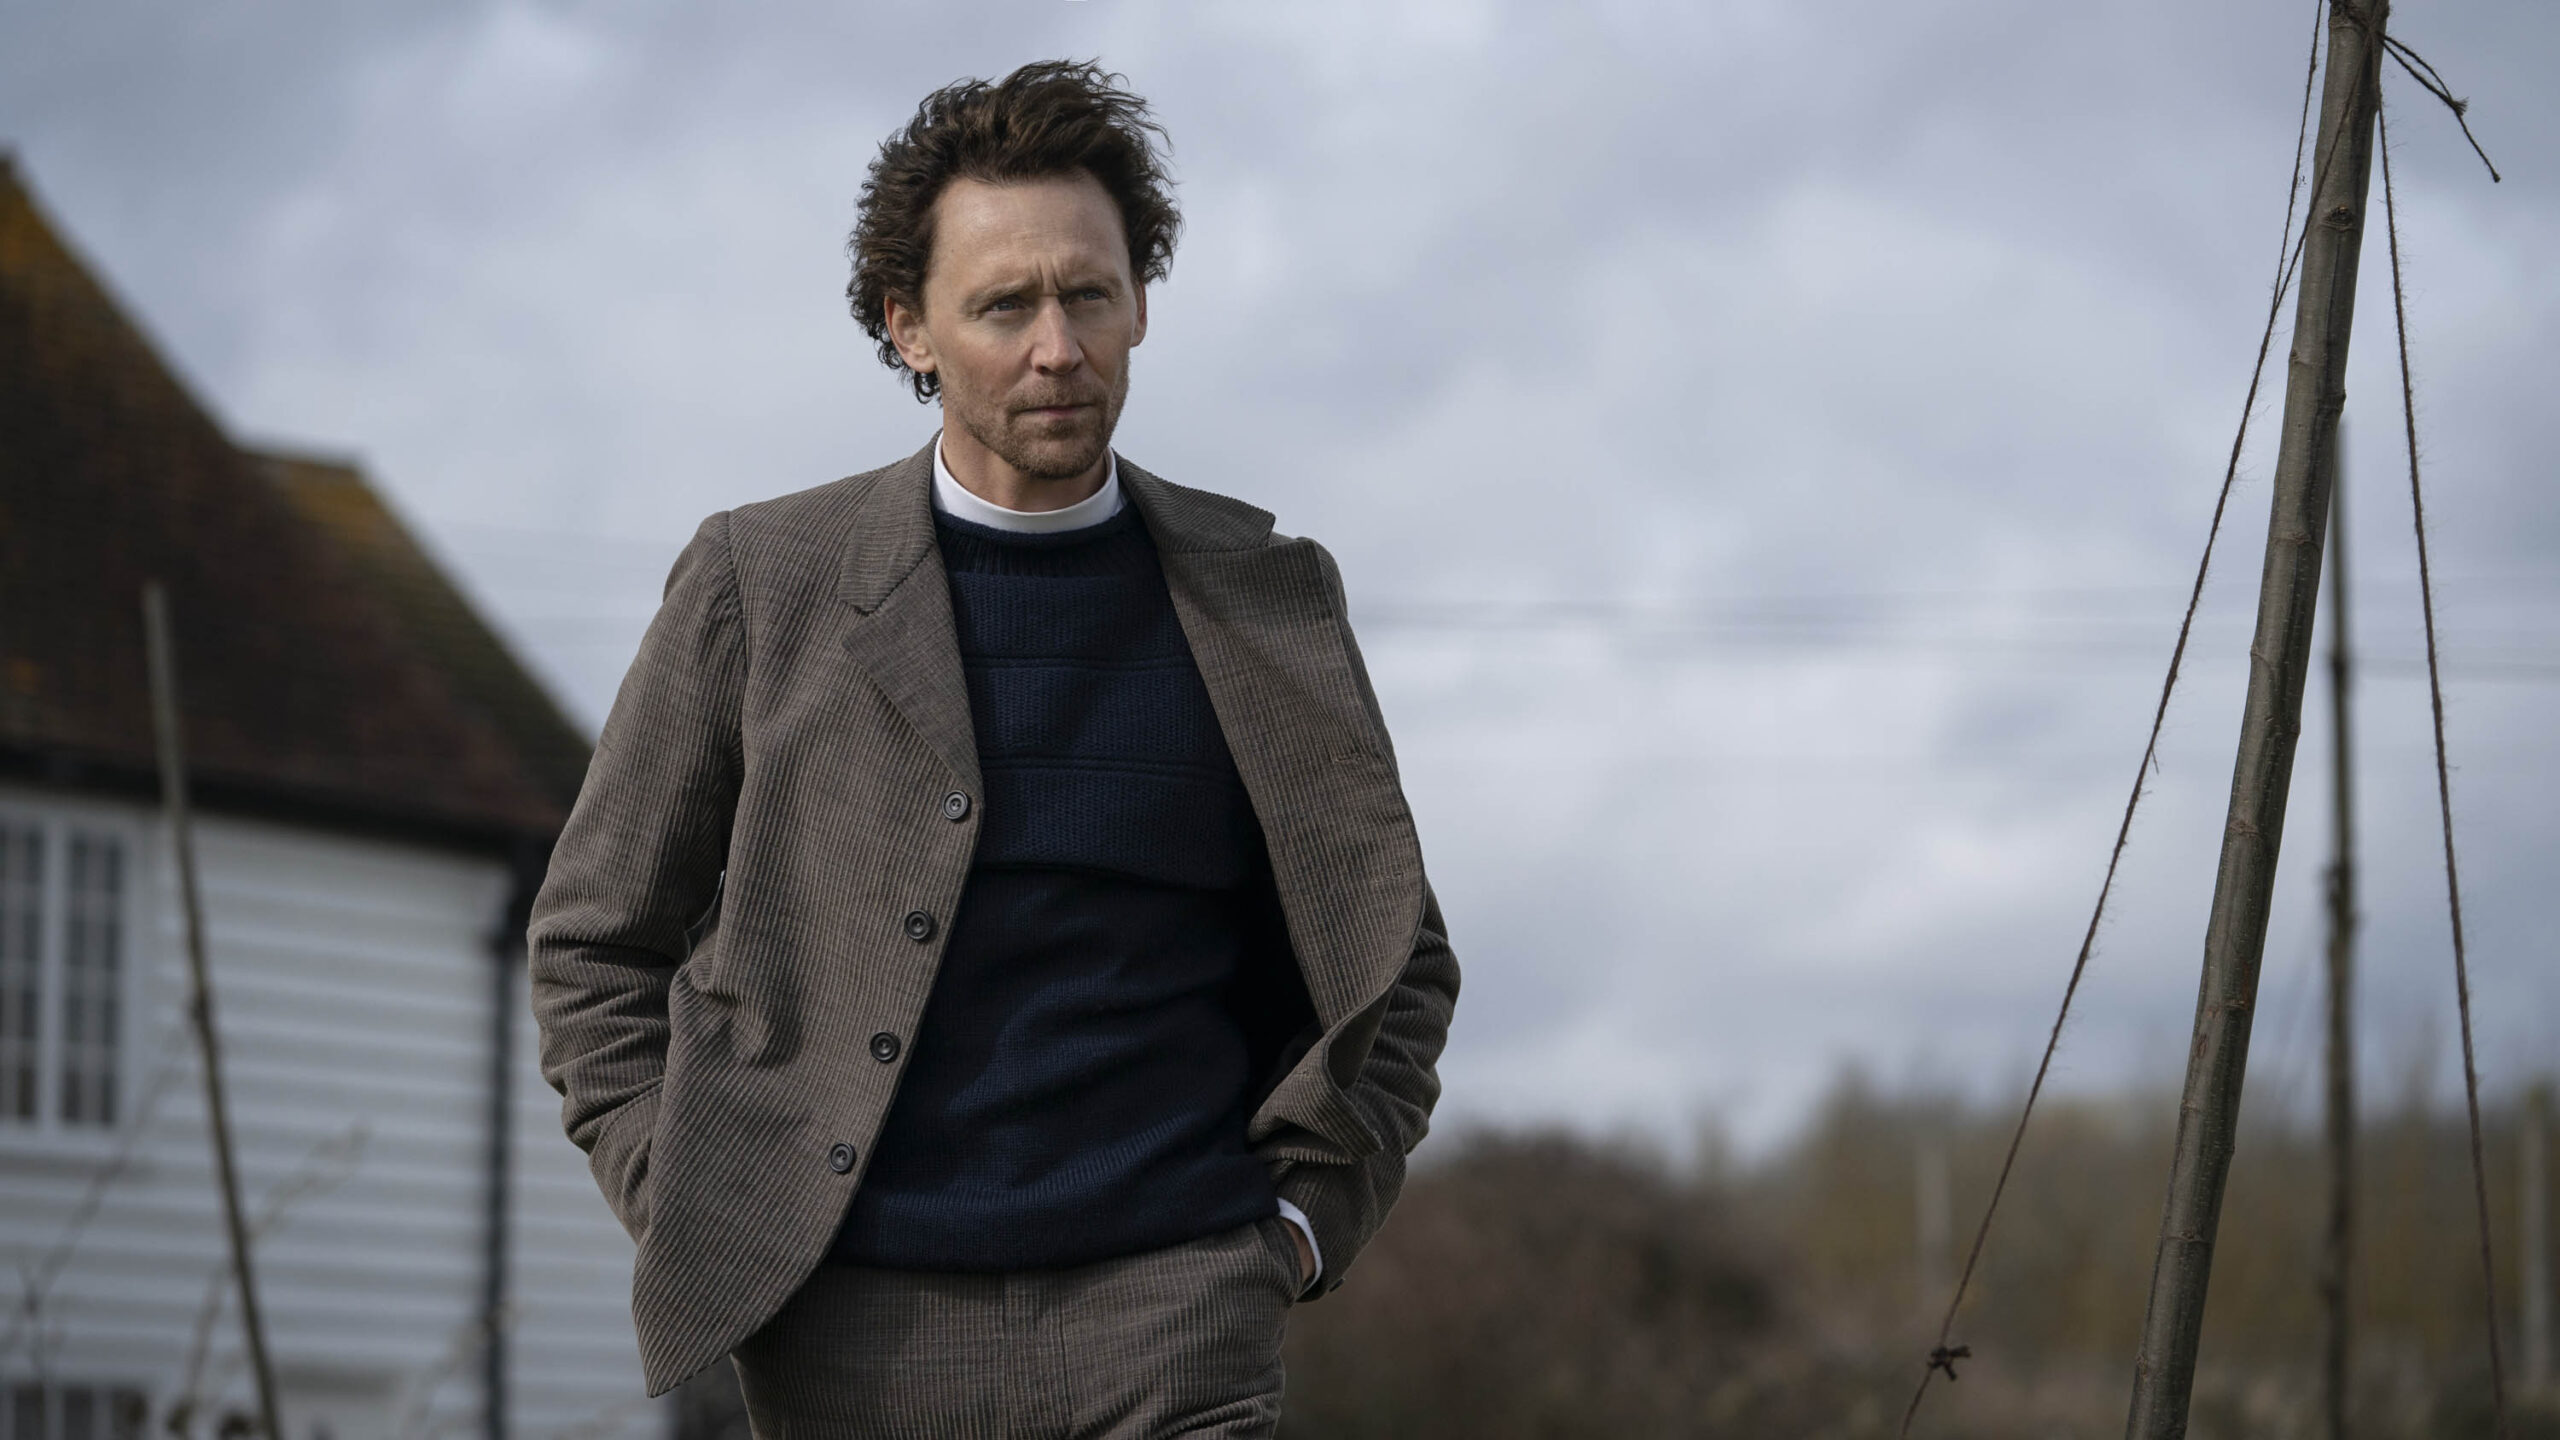 Tom Hiddleston in The Essex Serpent 1x01 [credit: Dean Rogers; courtesy of Apple]